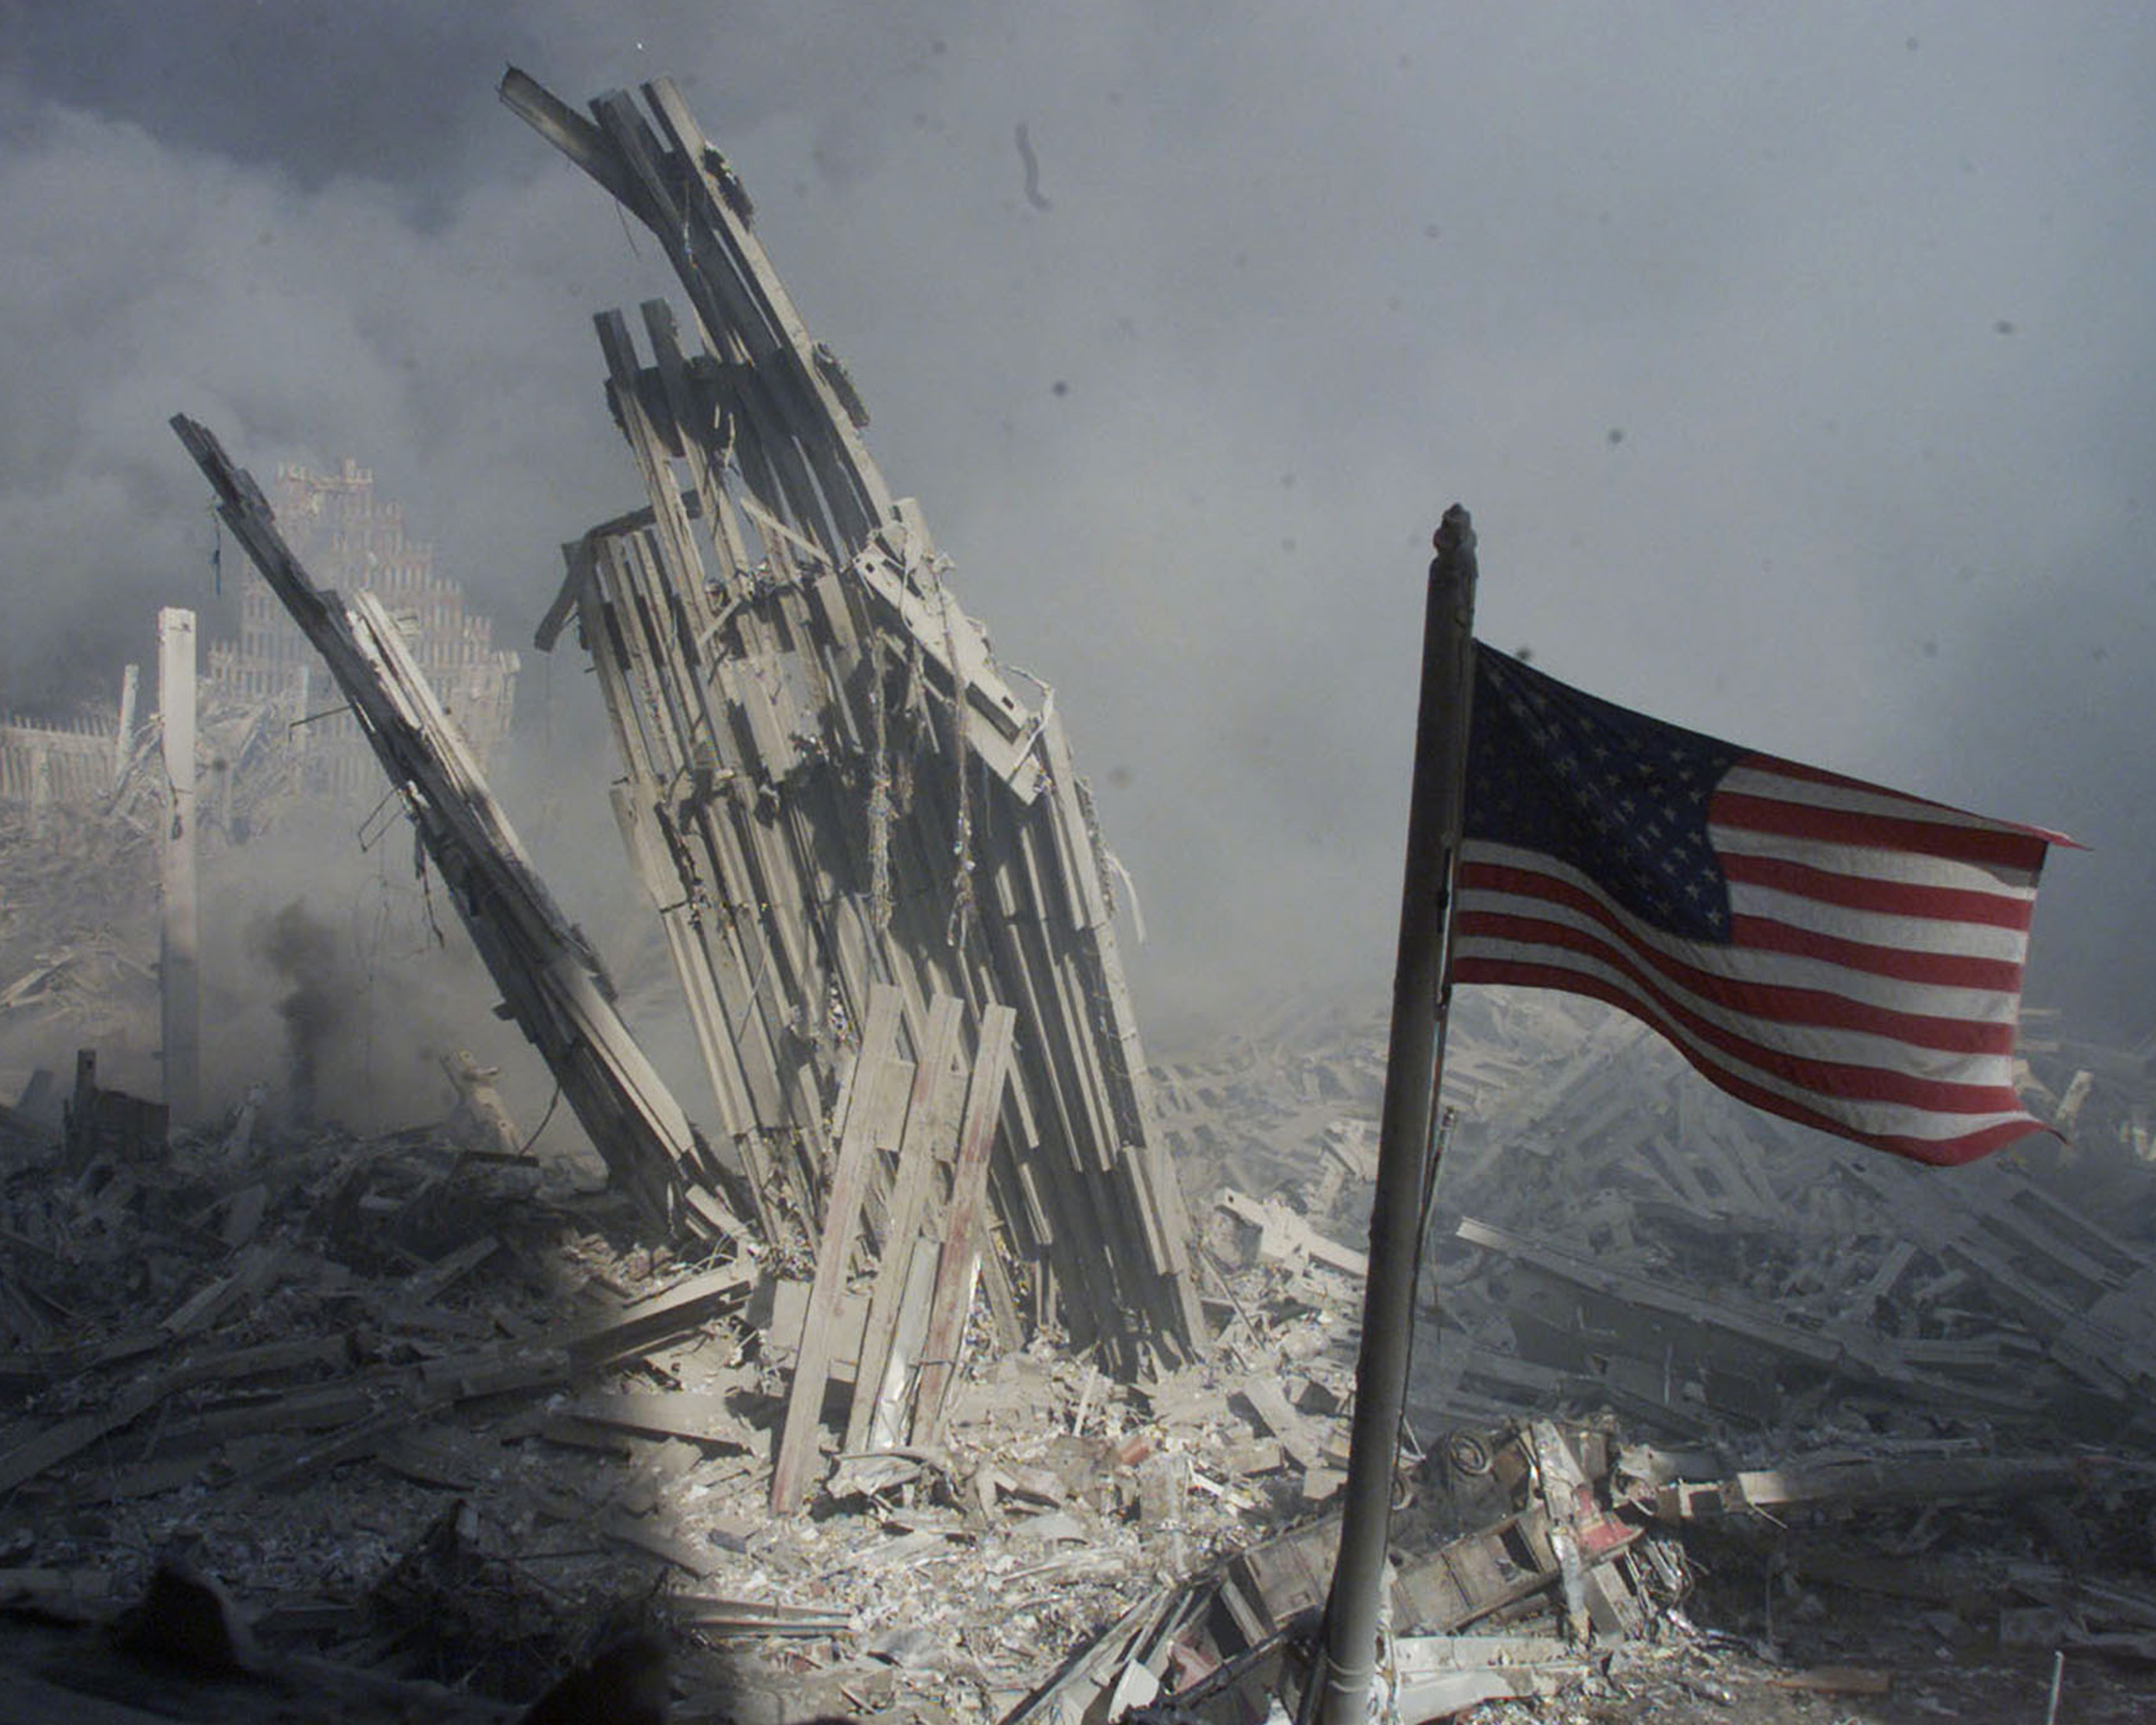 A photo showing an American flag flying near the base of the destroyed World Trade Center in New York on September 11, 2001.